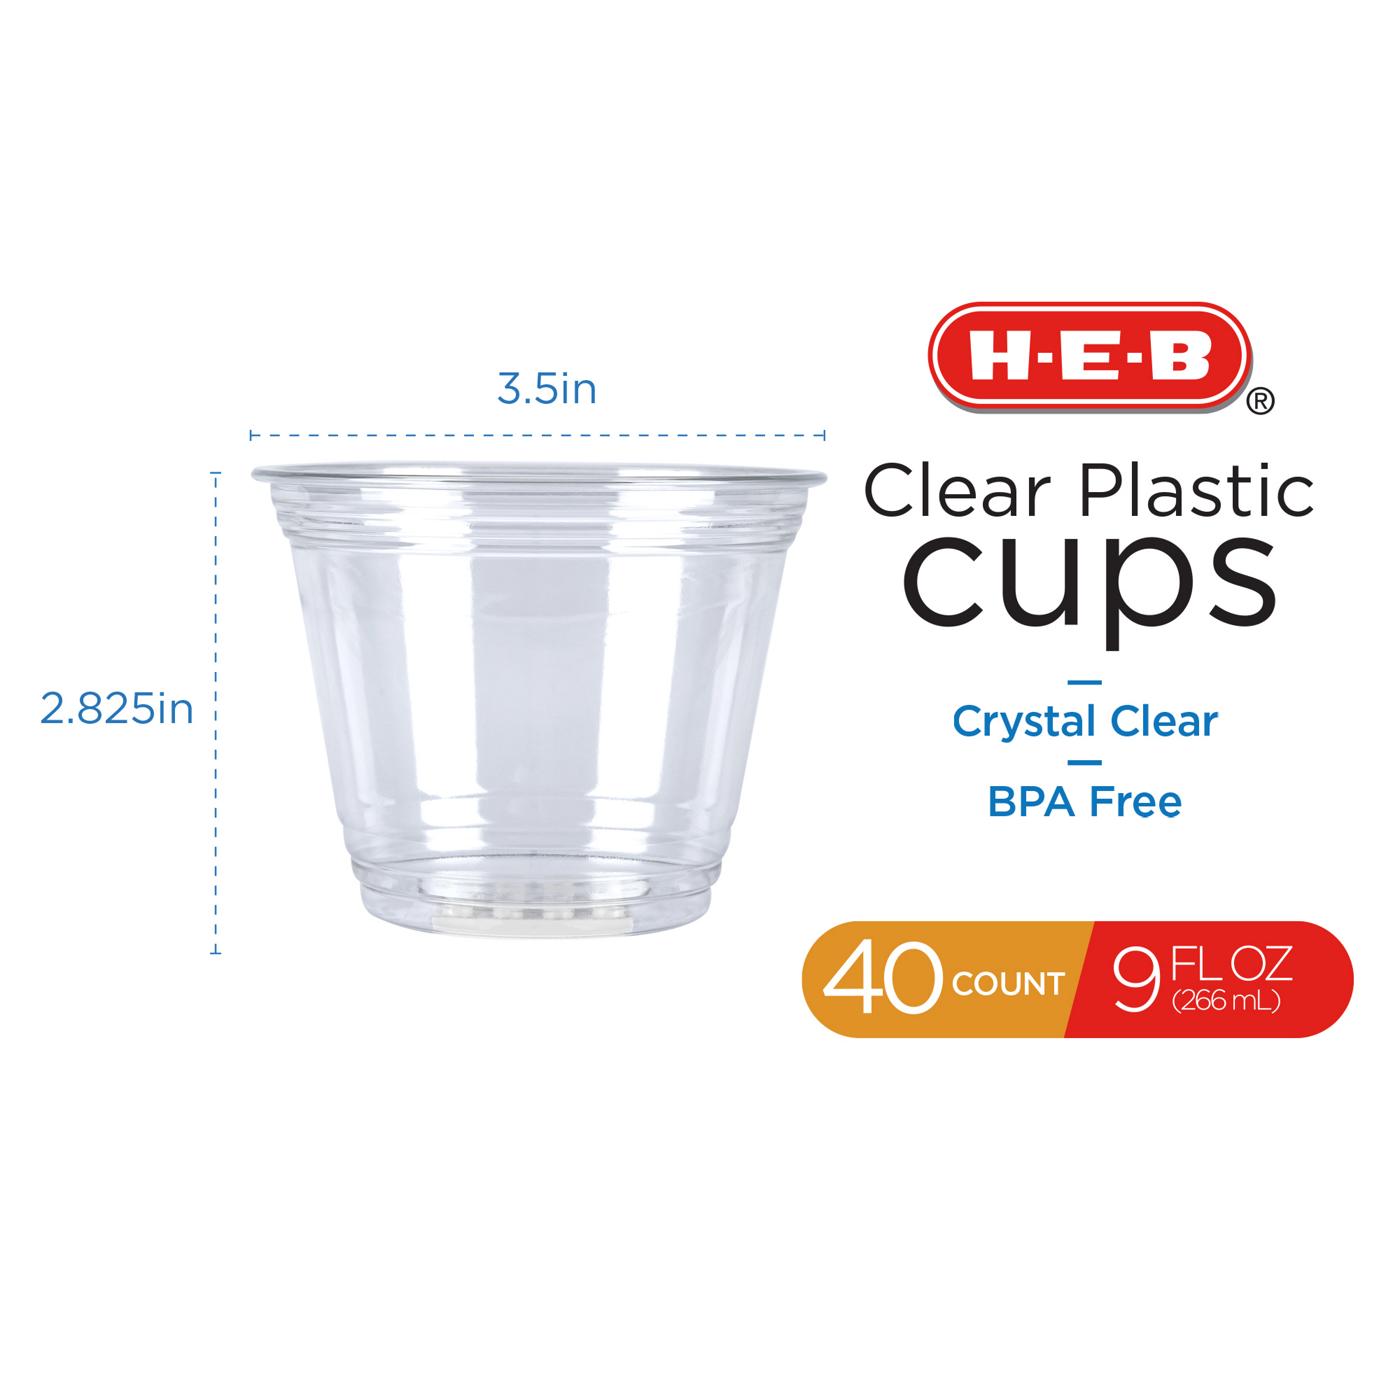 Hill Country Essentials Party 18 oz Plastic Cups Value Pack